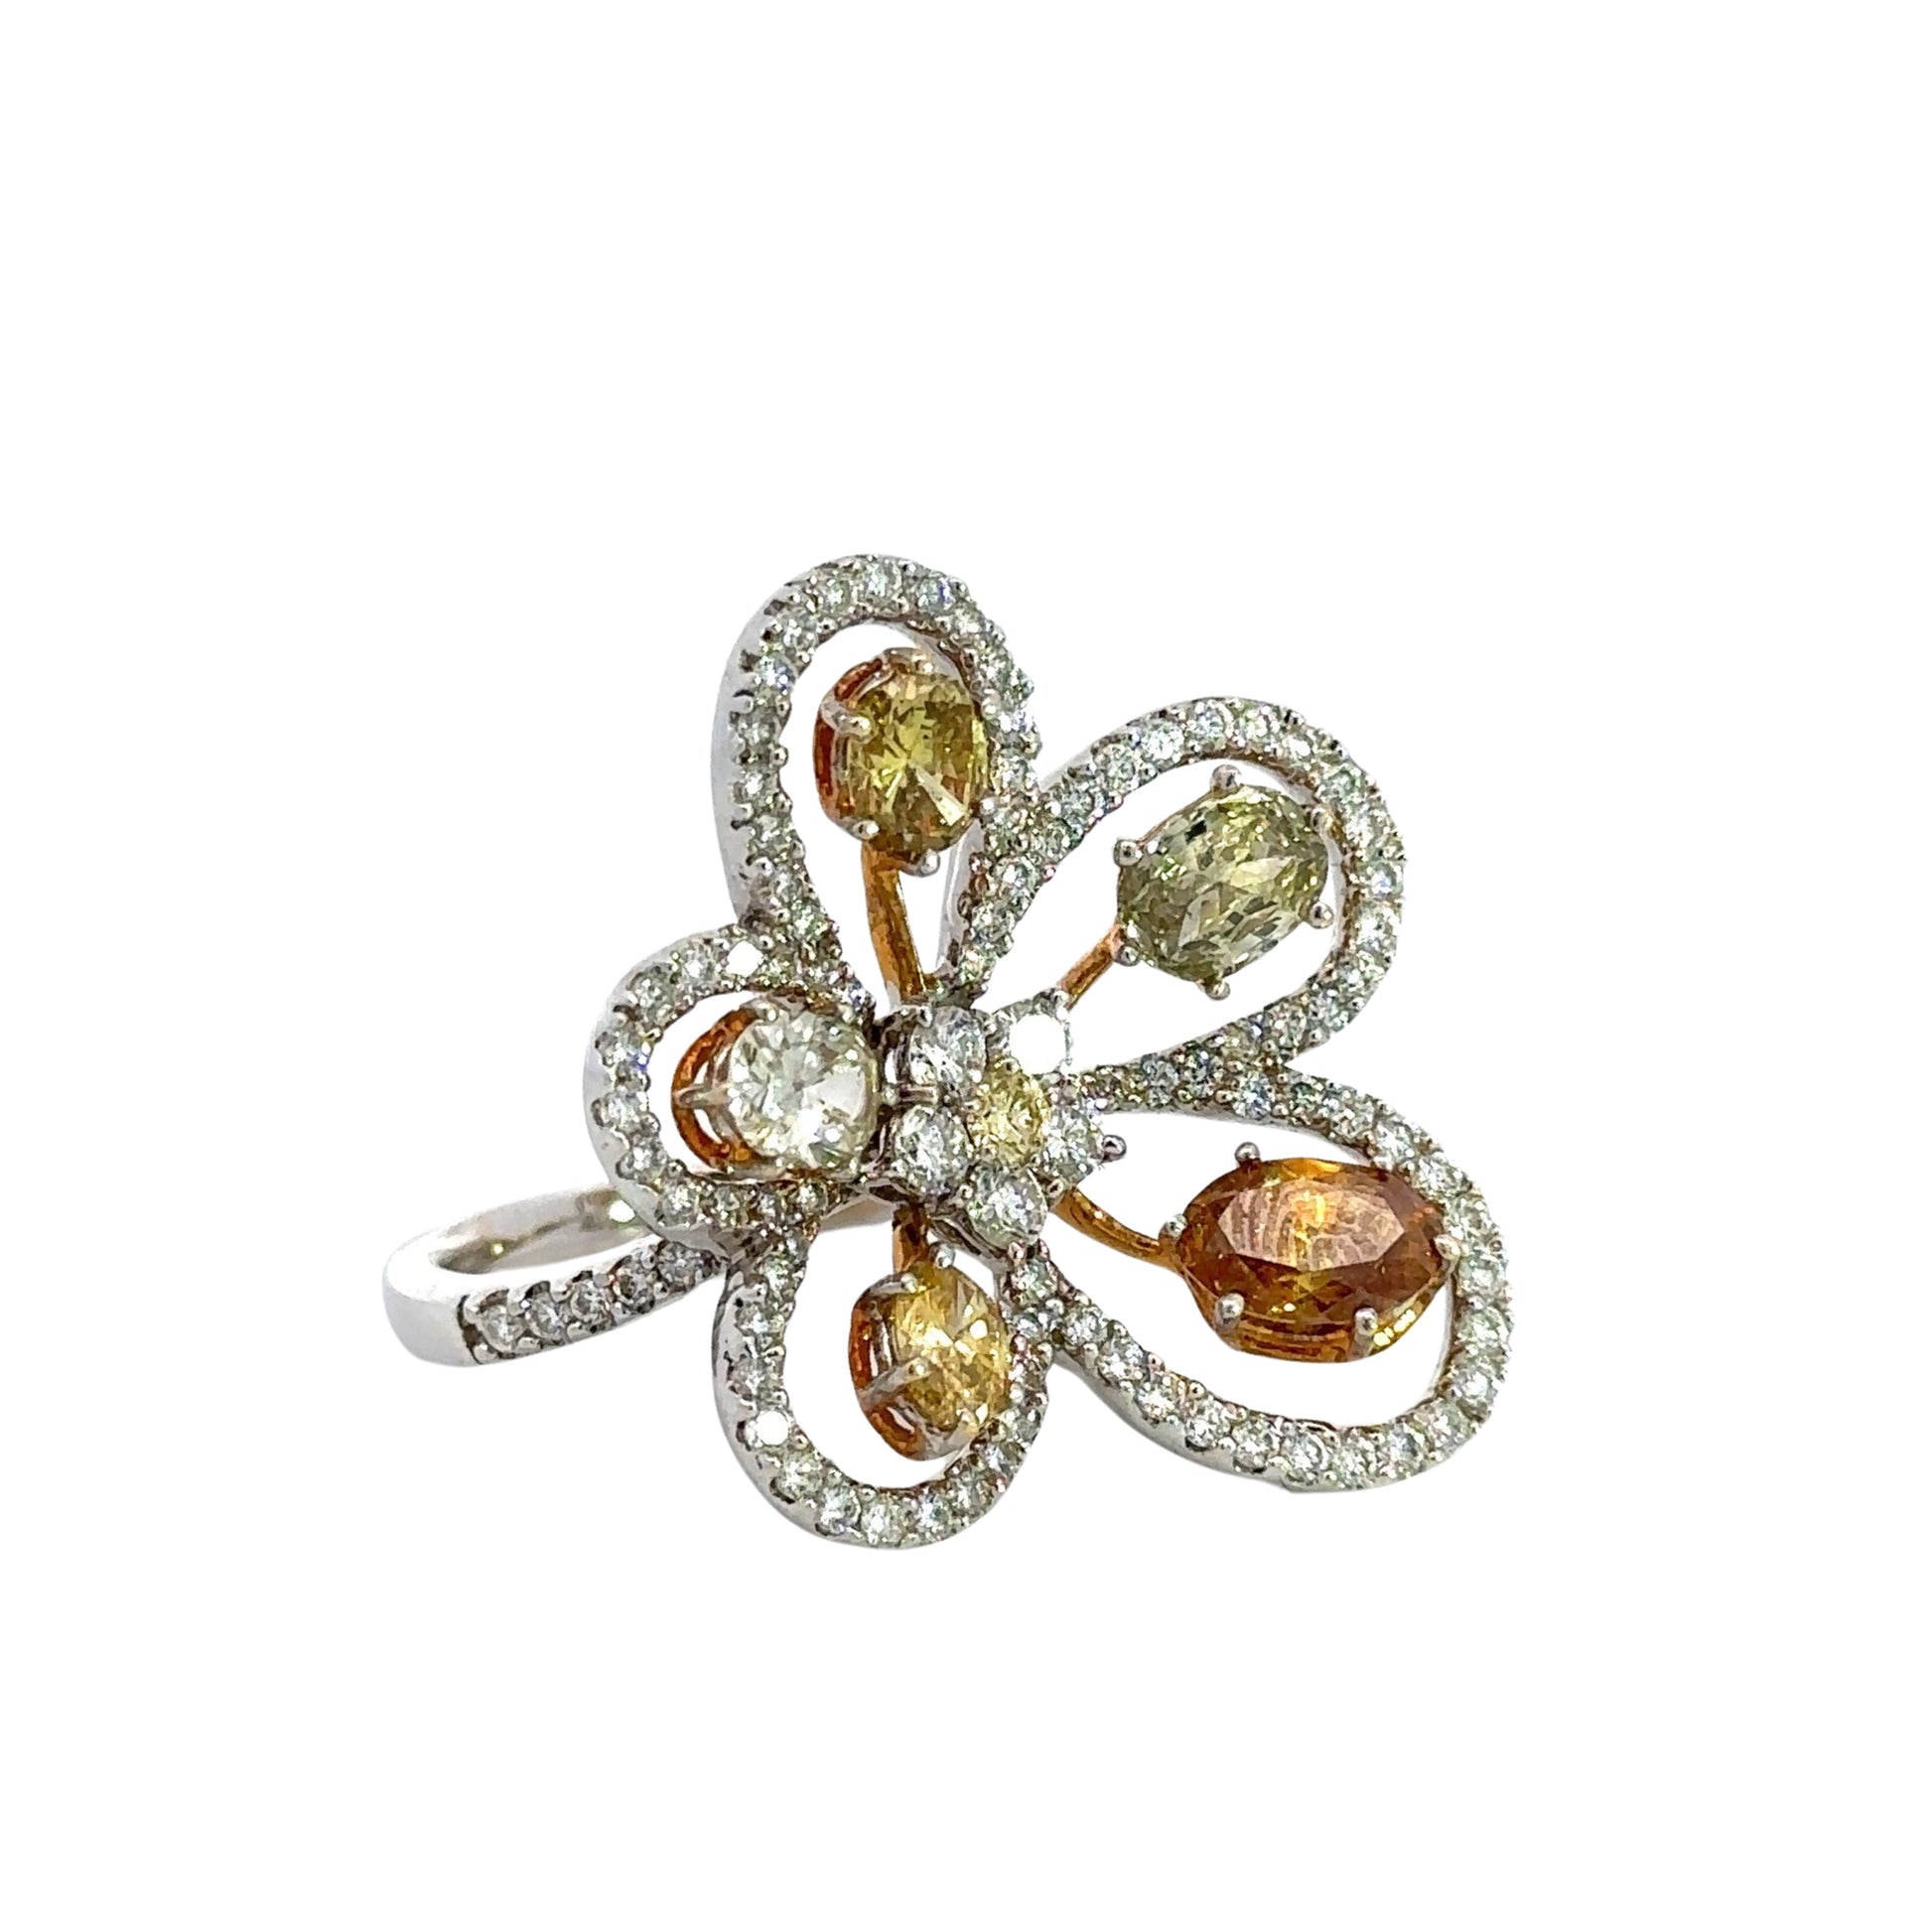 Diagonal view of white gold diamond floral ring with 6 colored stones